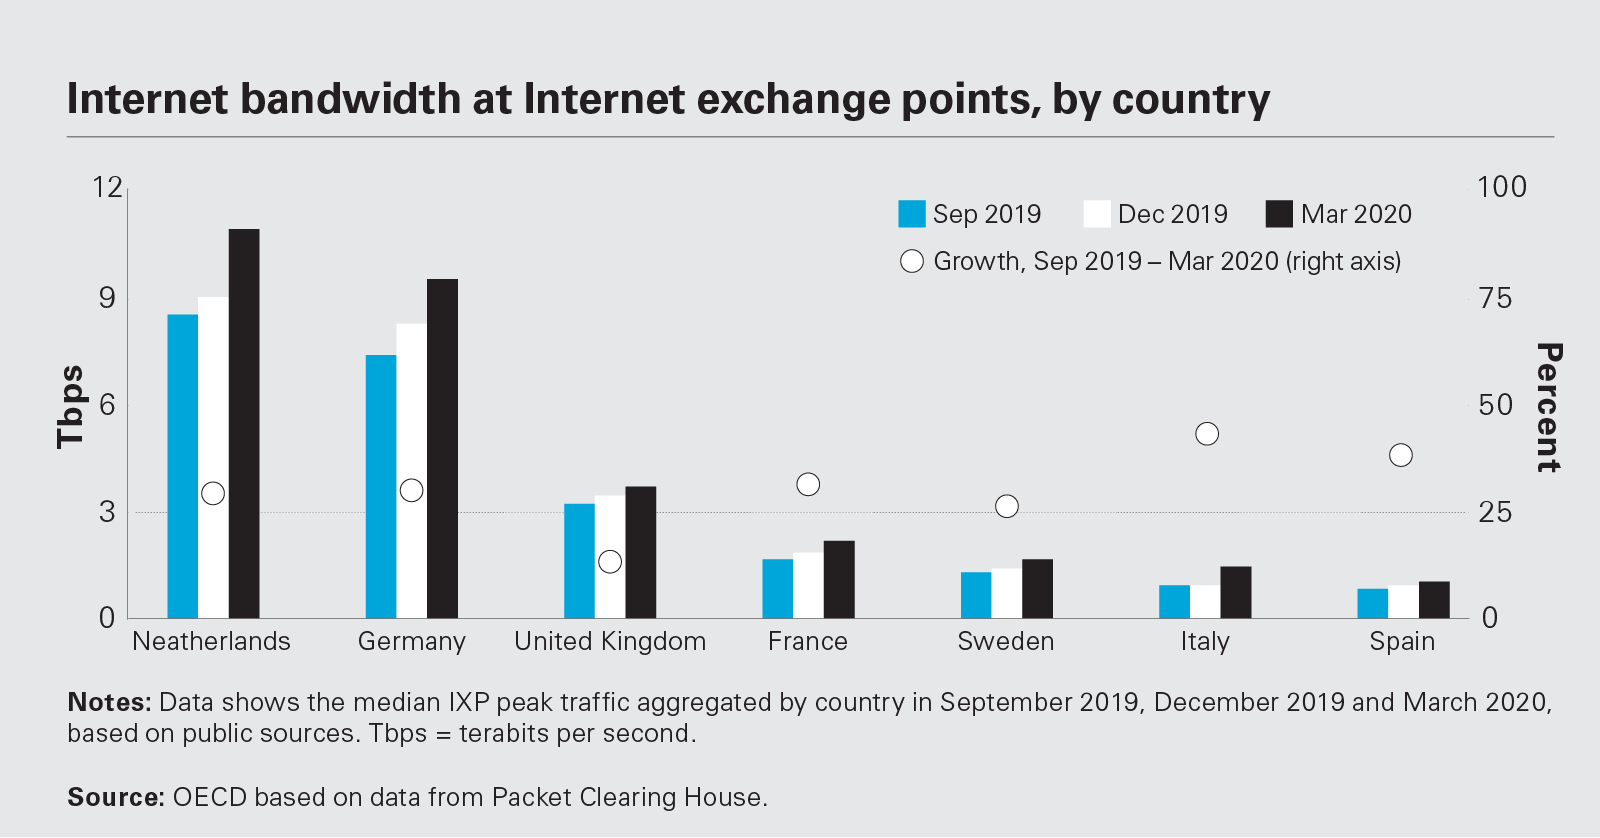 Internet bandwidth at internet exchange points, by country chart PDF